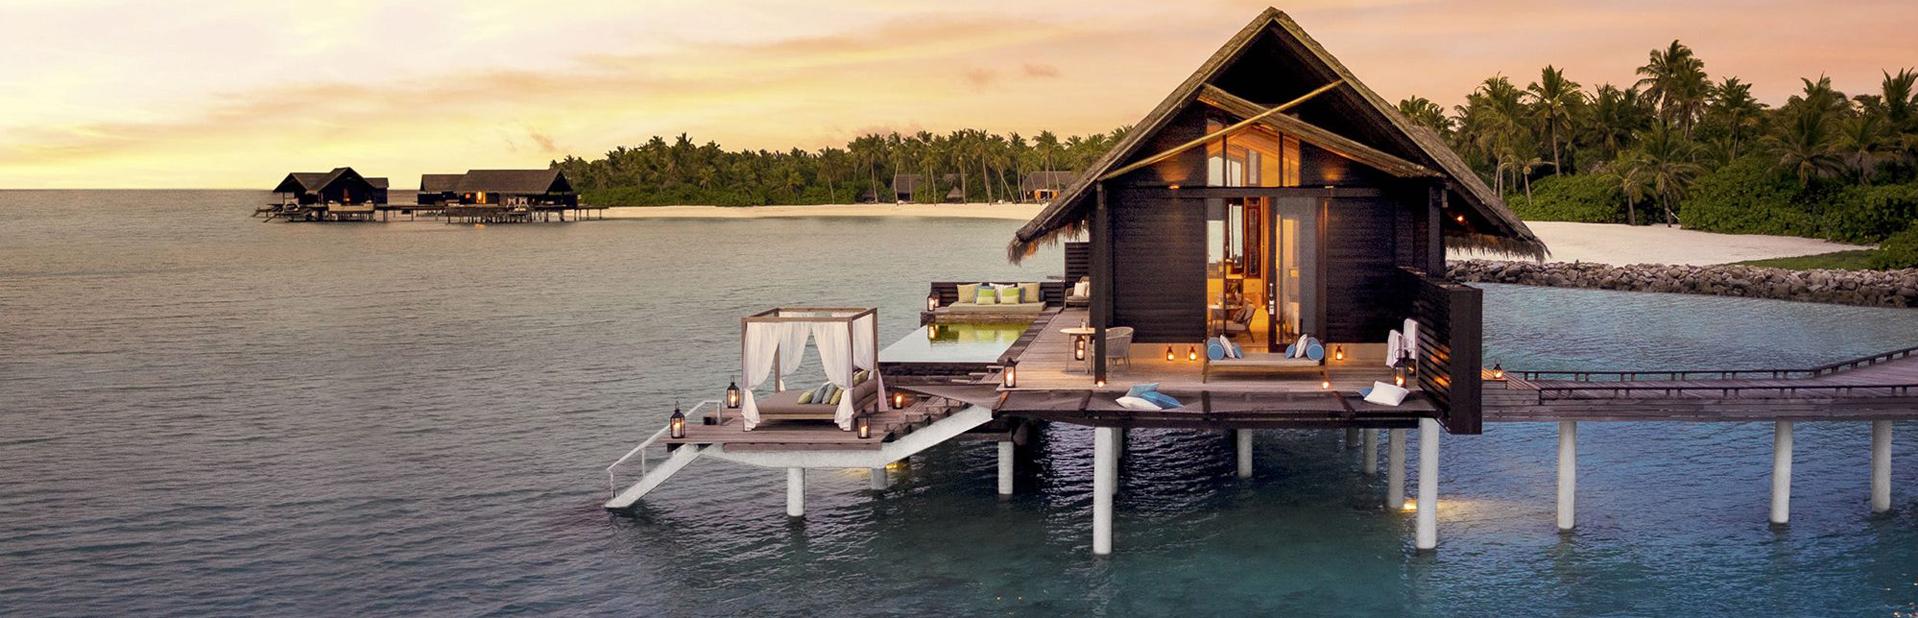 One & Only Reethi Rah Maldives 5 deluxe